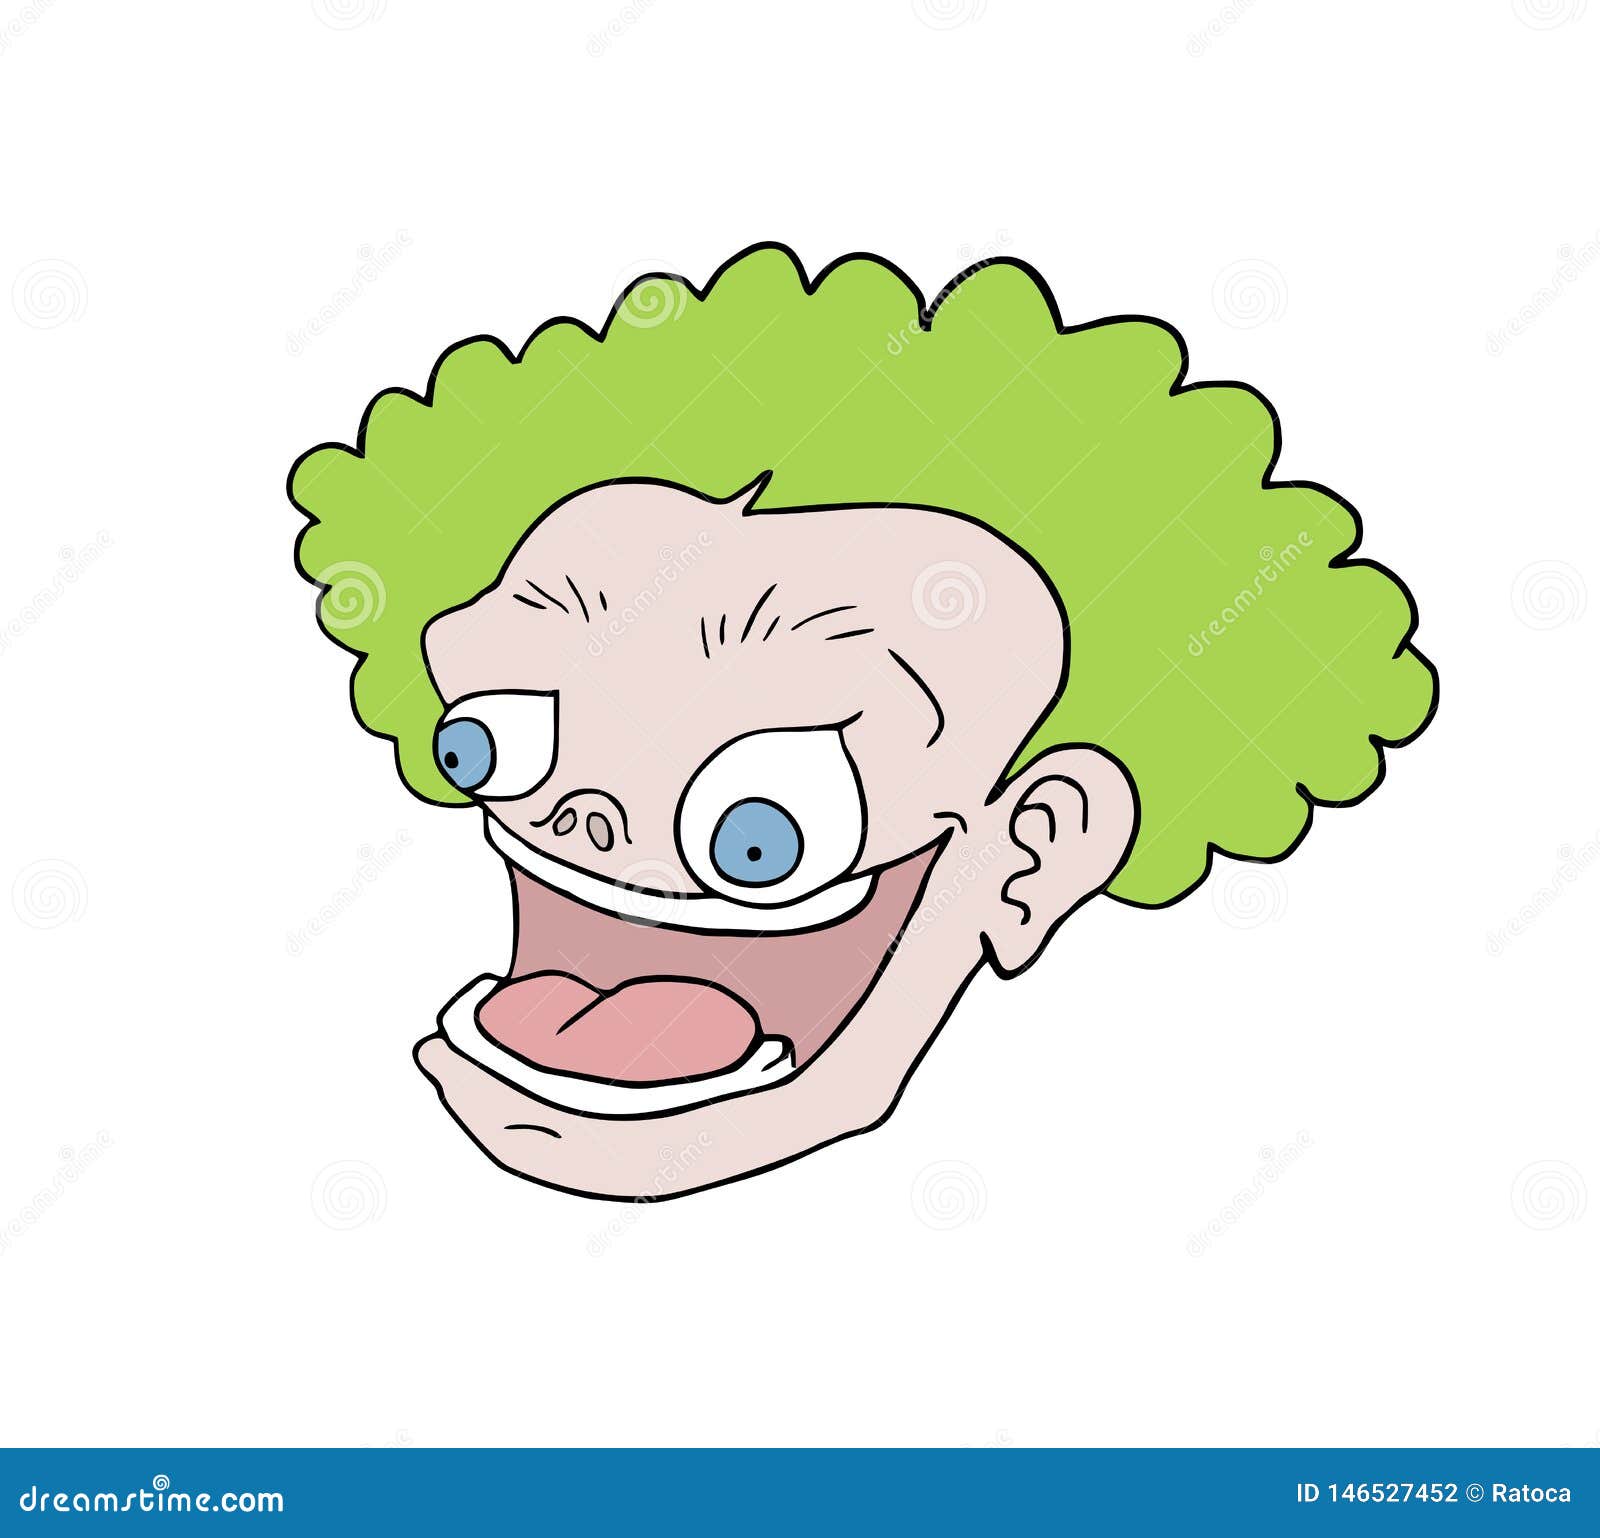 Design of Funny Cartoon Face Draw Stock Vector - Illustration of head,  expression: 146527452